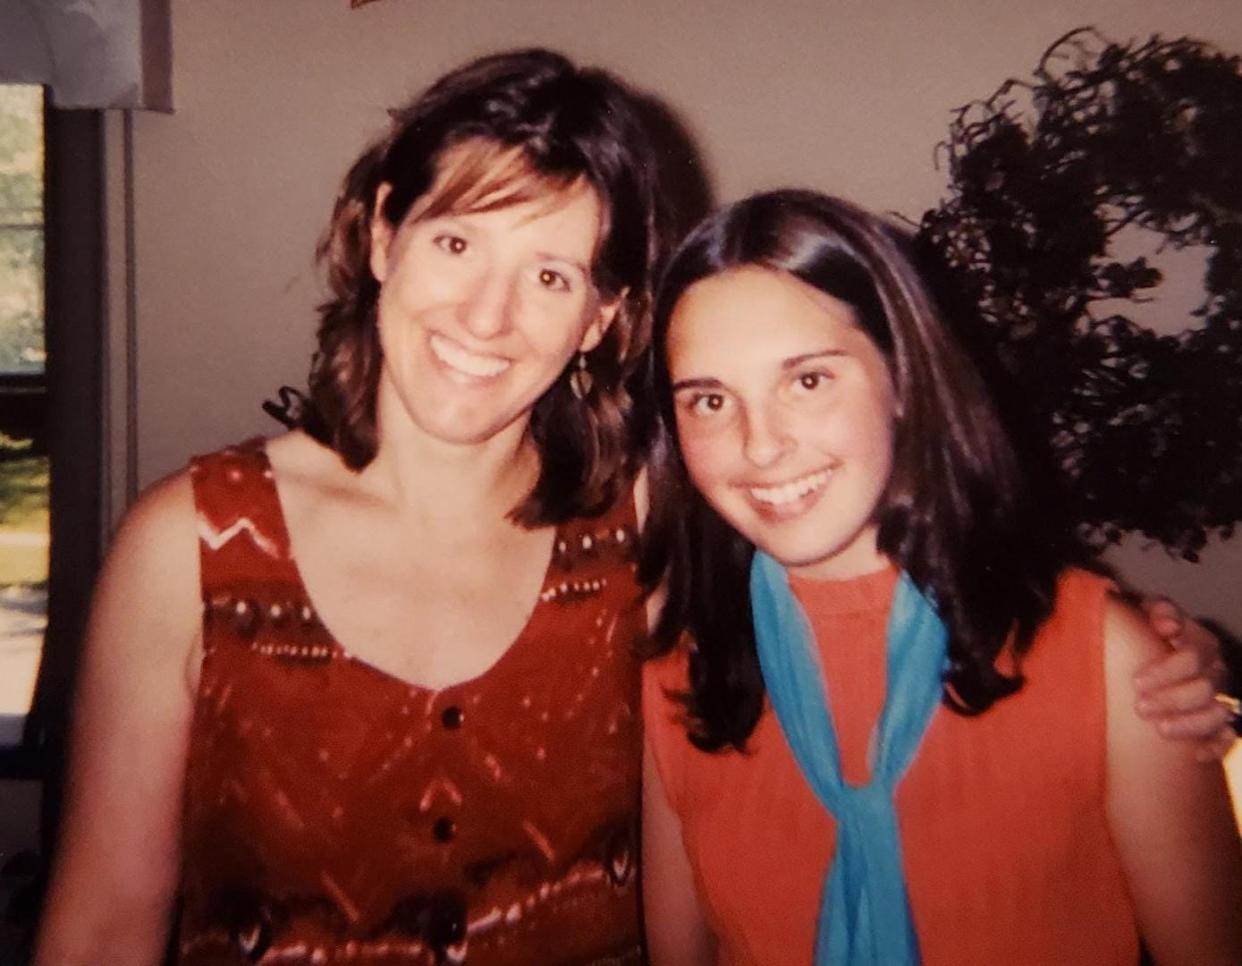 Melania Murphy and her daughter at her "period party" in July 2002